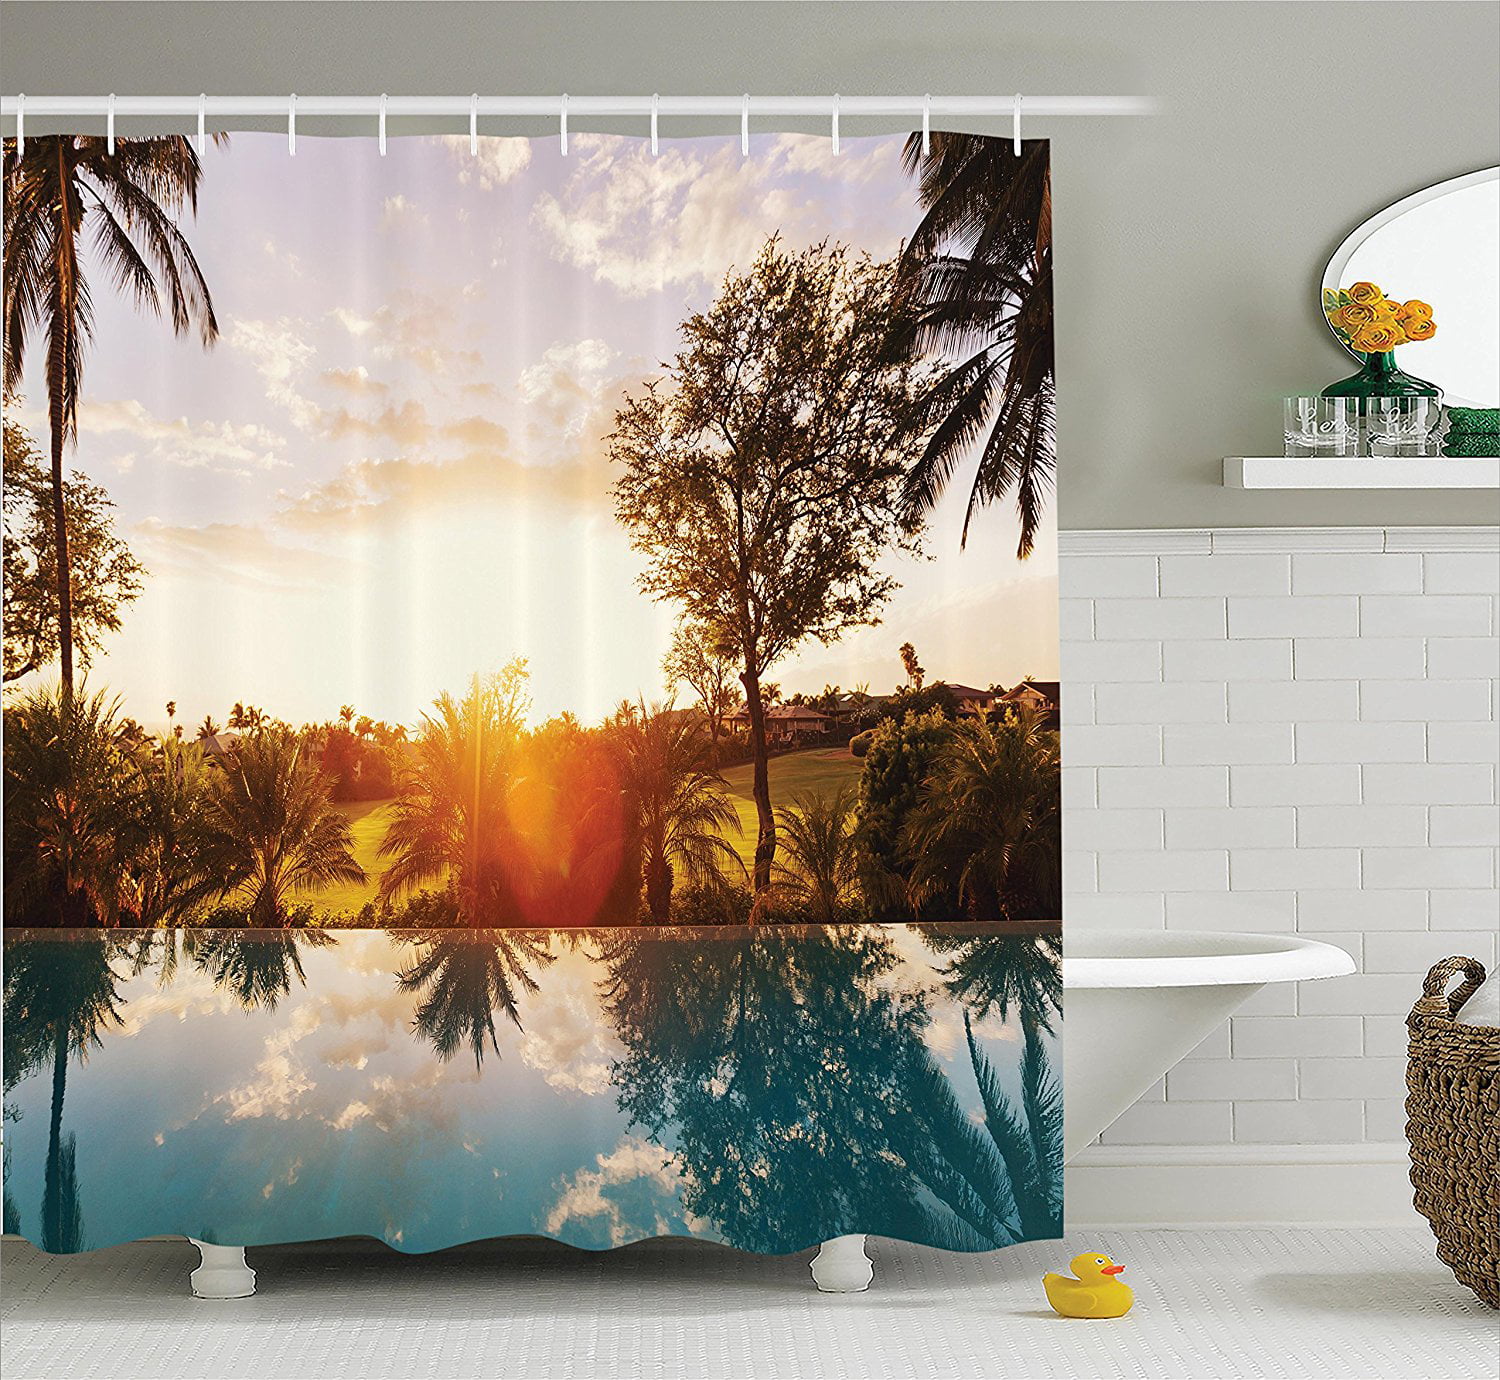 Details about   City Shower Curtain Dramatic View NYC Skyline Print for Bathroom 